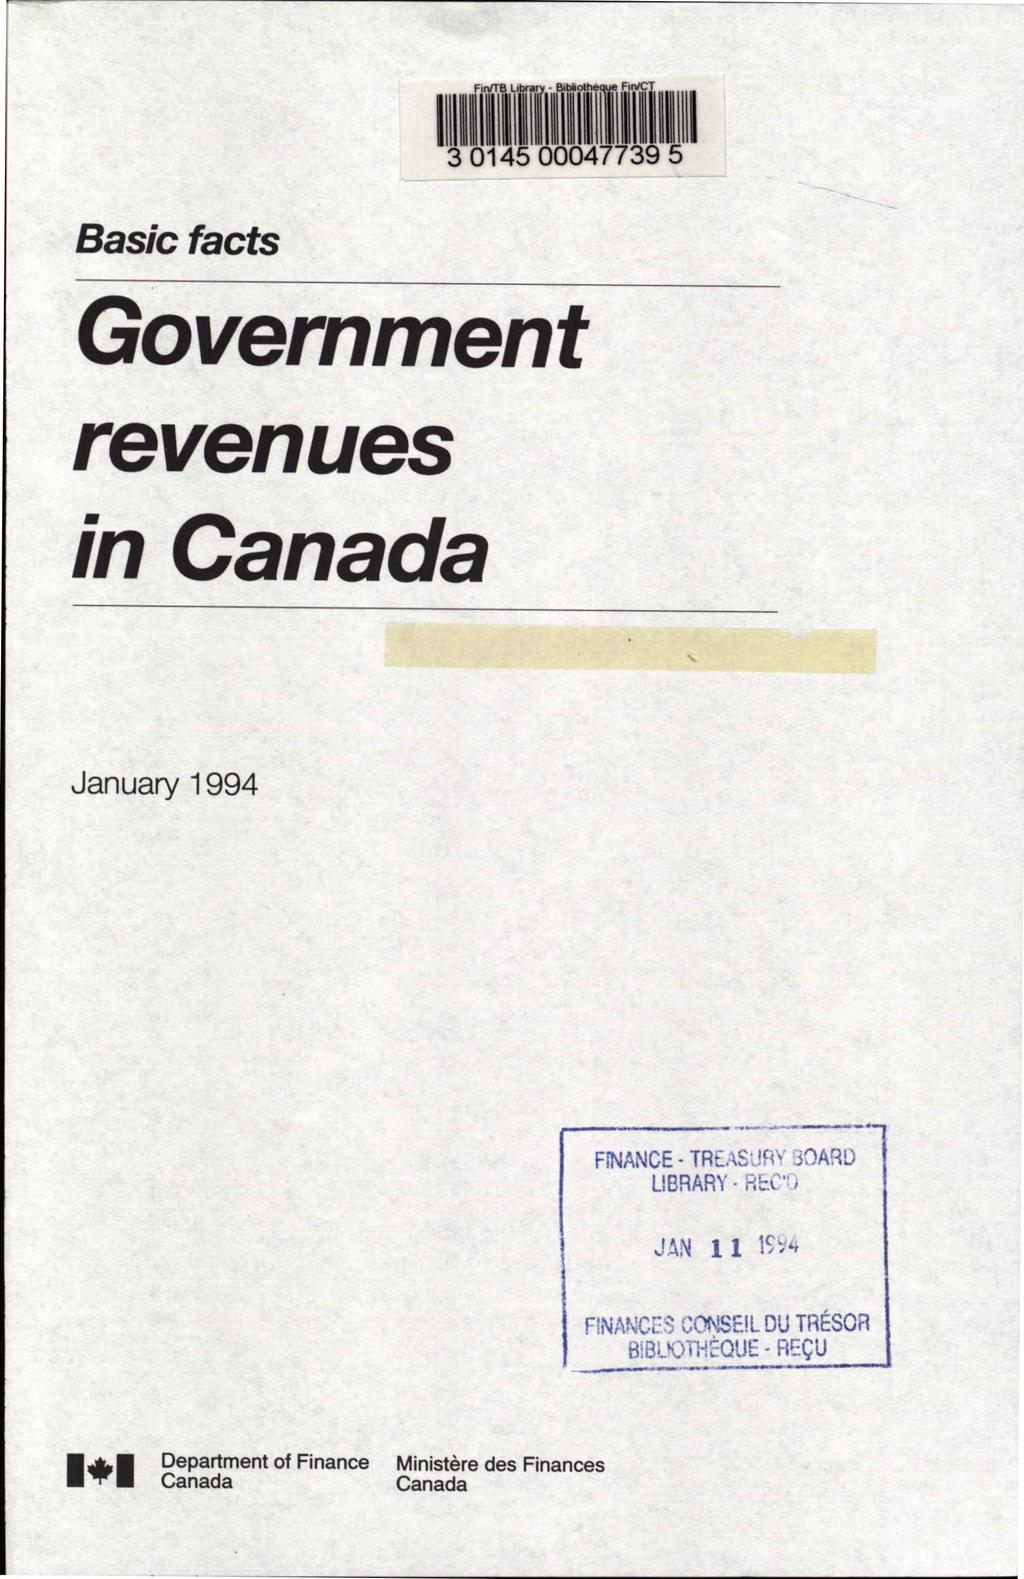 1, 11 1:1,[ 1,Df4fIrl i, Basic facts Government revenues in Canada January 1994 FINANCE - TREASURY BOARD LIBRARY RÉC'f)